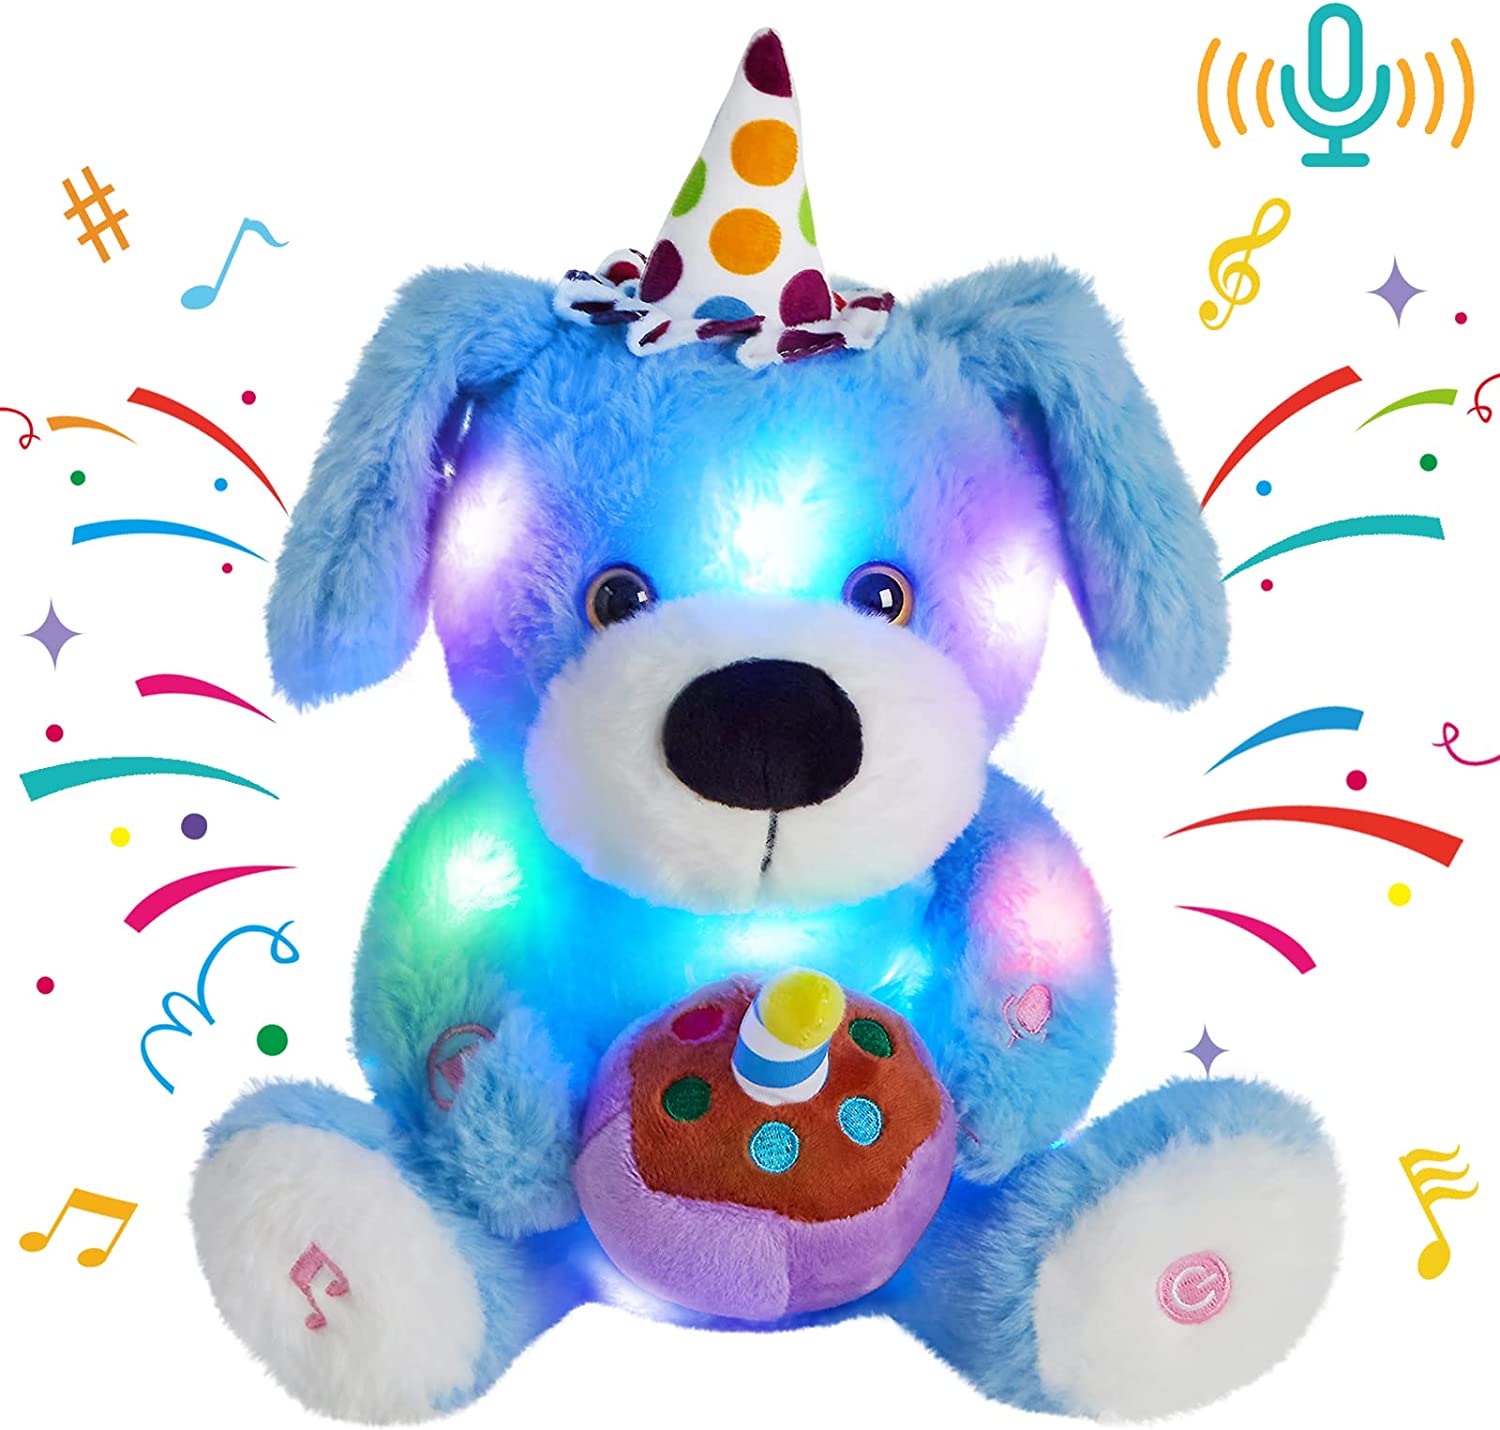 Glow Guards 12" Happy Birthday LED Dog Stuffed Animal Electric Recordable Glowing Musical Puppy Singing Soft Plush Toy Children’s Day Gift for Kids, Blue